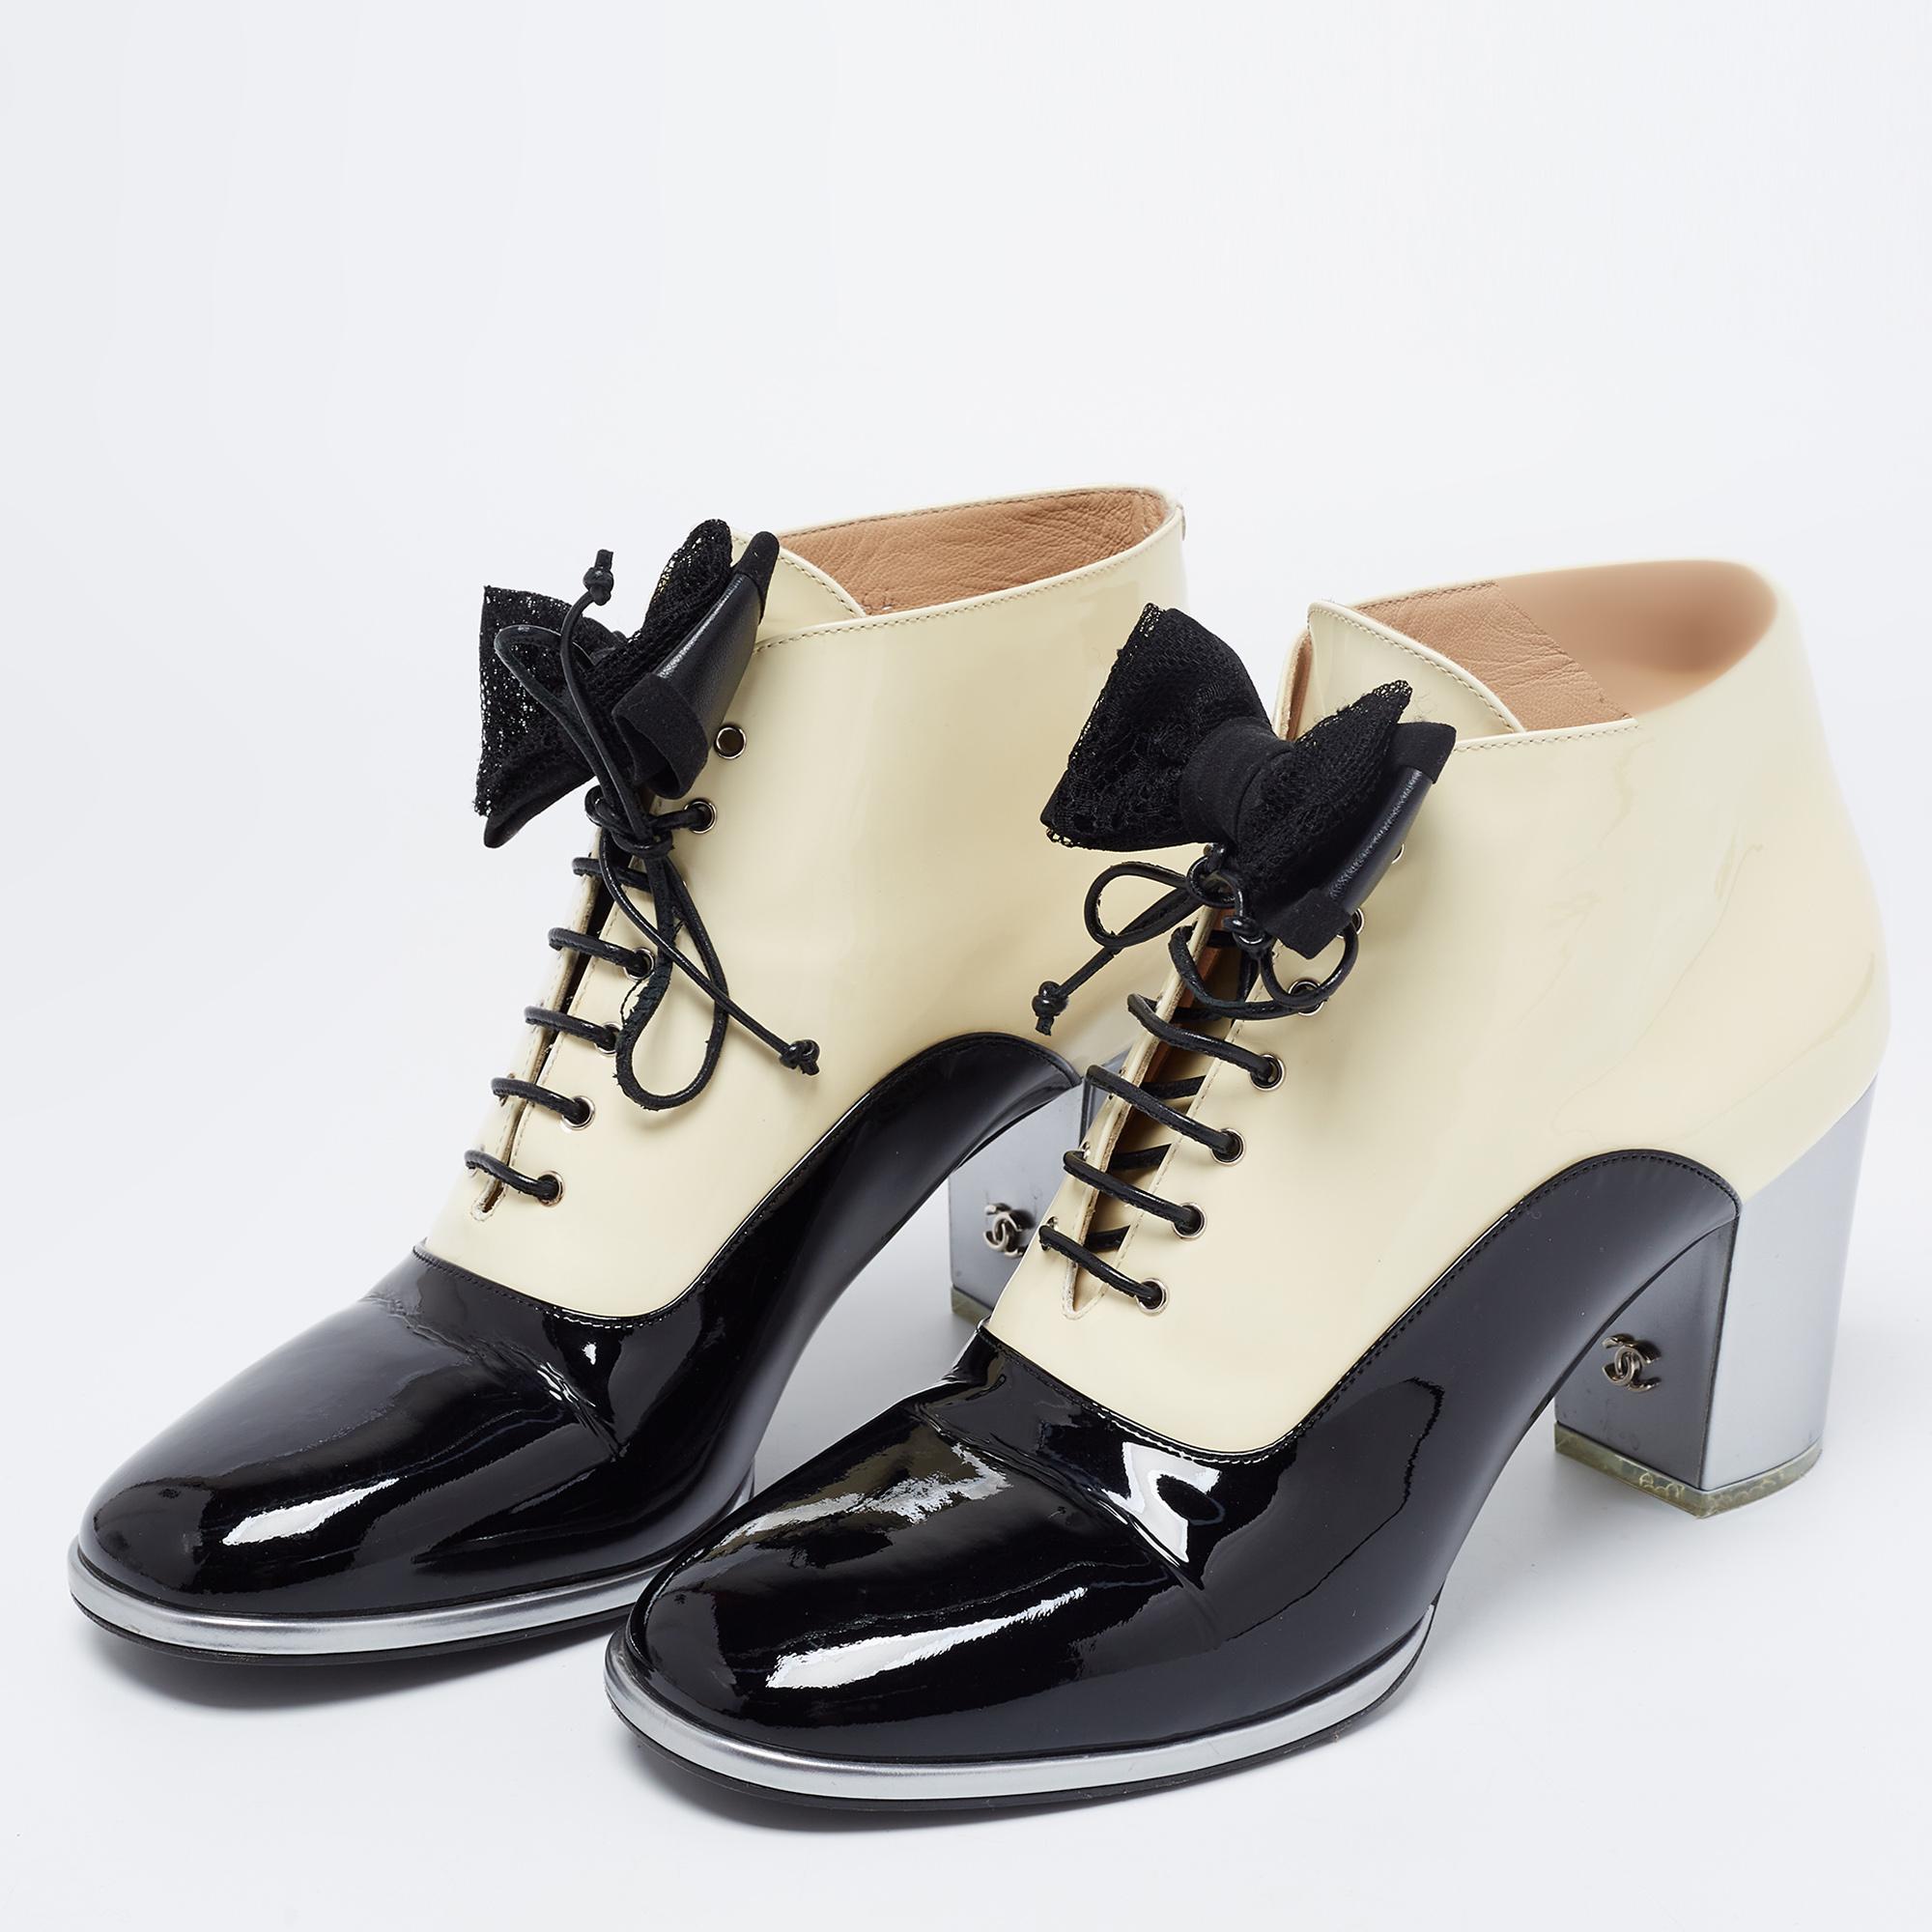 Chanel Black/Beige Patent Leather Bow Lace-Up Ankle Boots Size 40 3